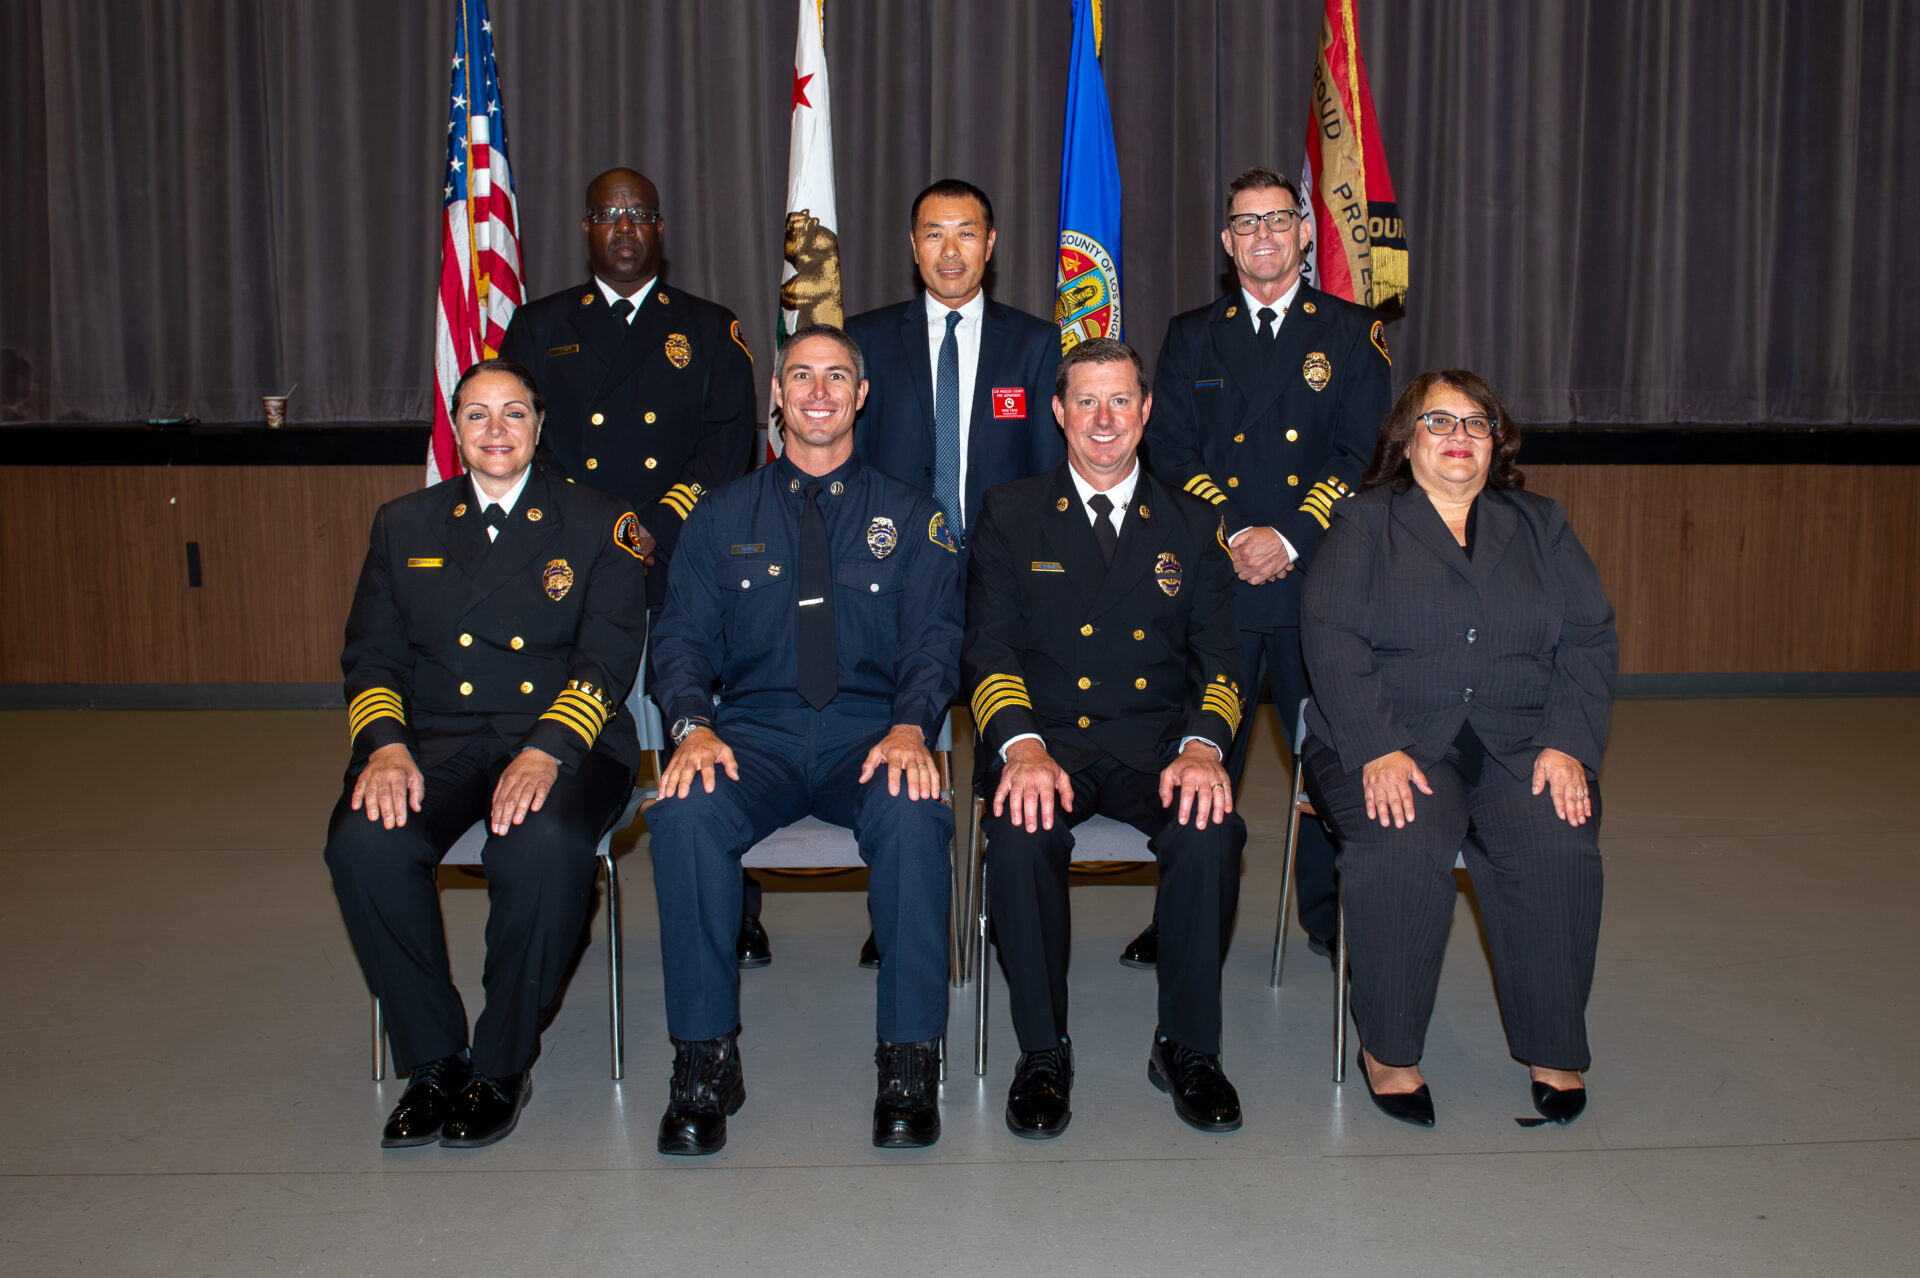 The County of Los Angeles Fire Department held a formal promotional ceremony to honor newly promoted personnel.